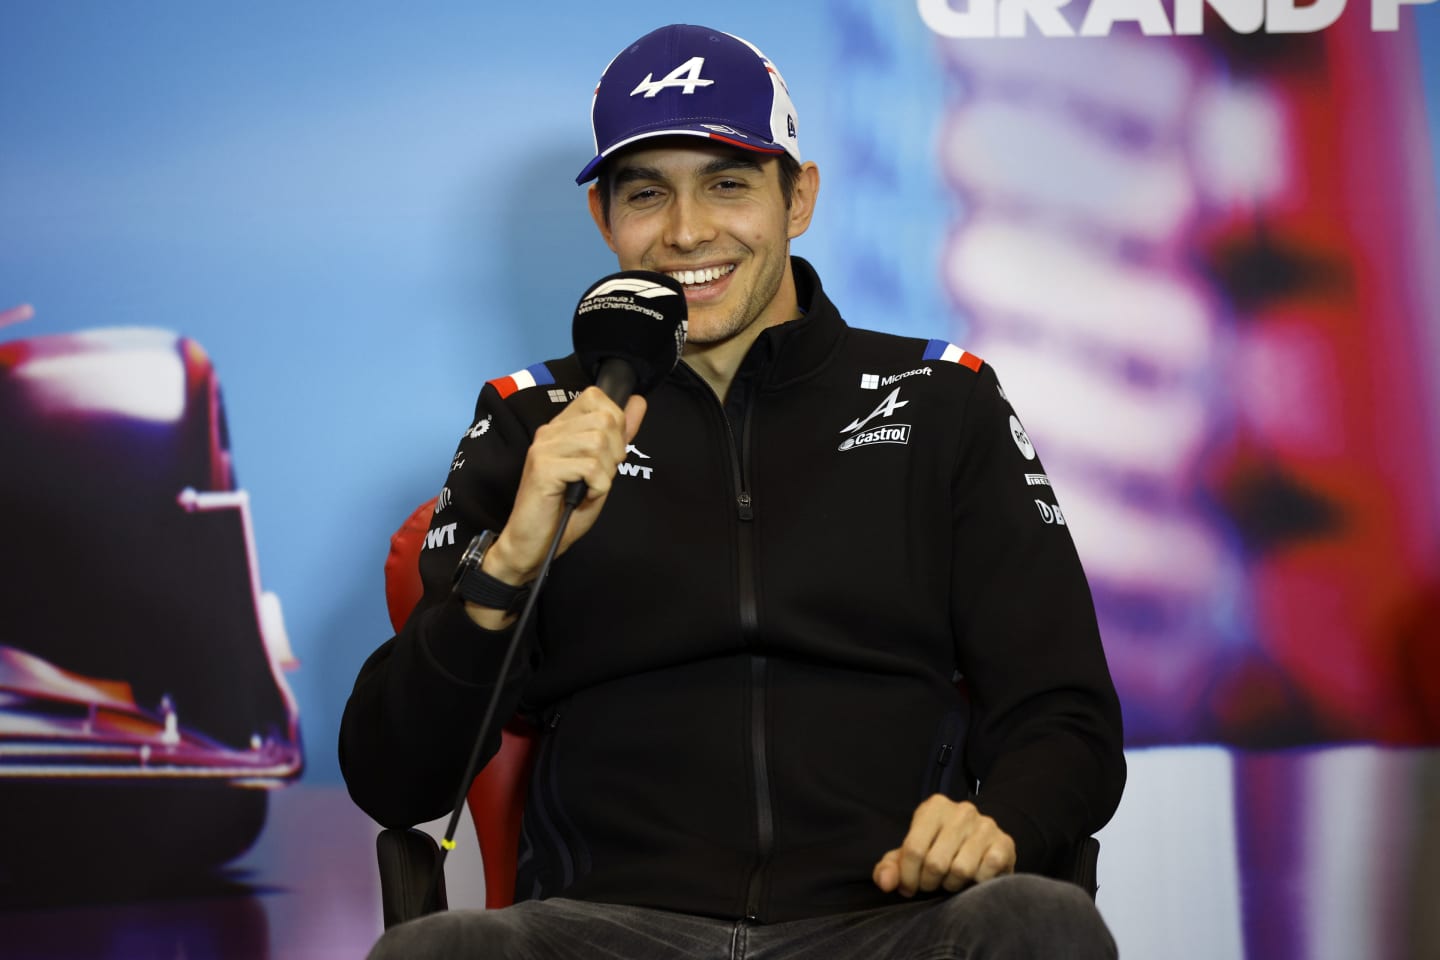 AUSTIN, TEXAS - OCTOBER 20: Esteban Ocon of France and Alpine F1 attends the Drivers Press Conference during previews ahead of the F1 Grand Prix of USA at Circuit of The Americas on October 20, 2022 in Austin, Texas. (Photo by Jared C. Tilton/Getty Images)